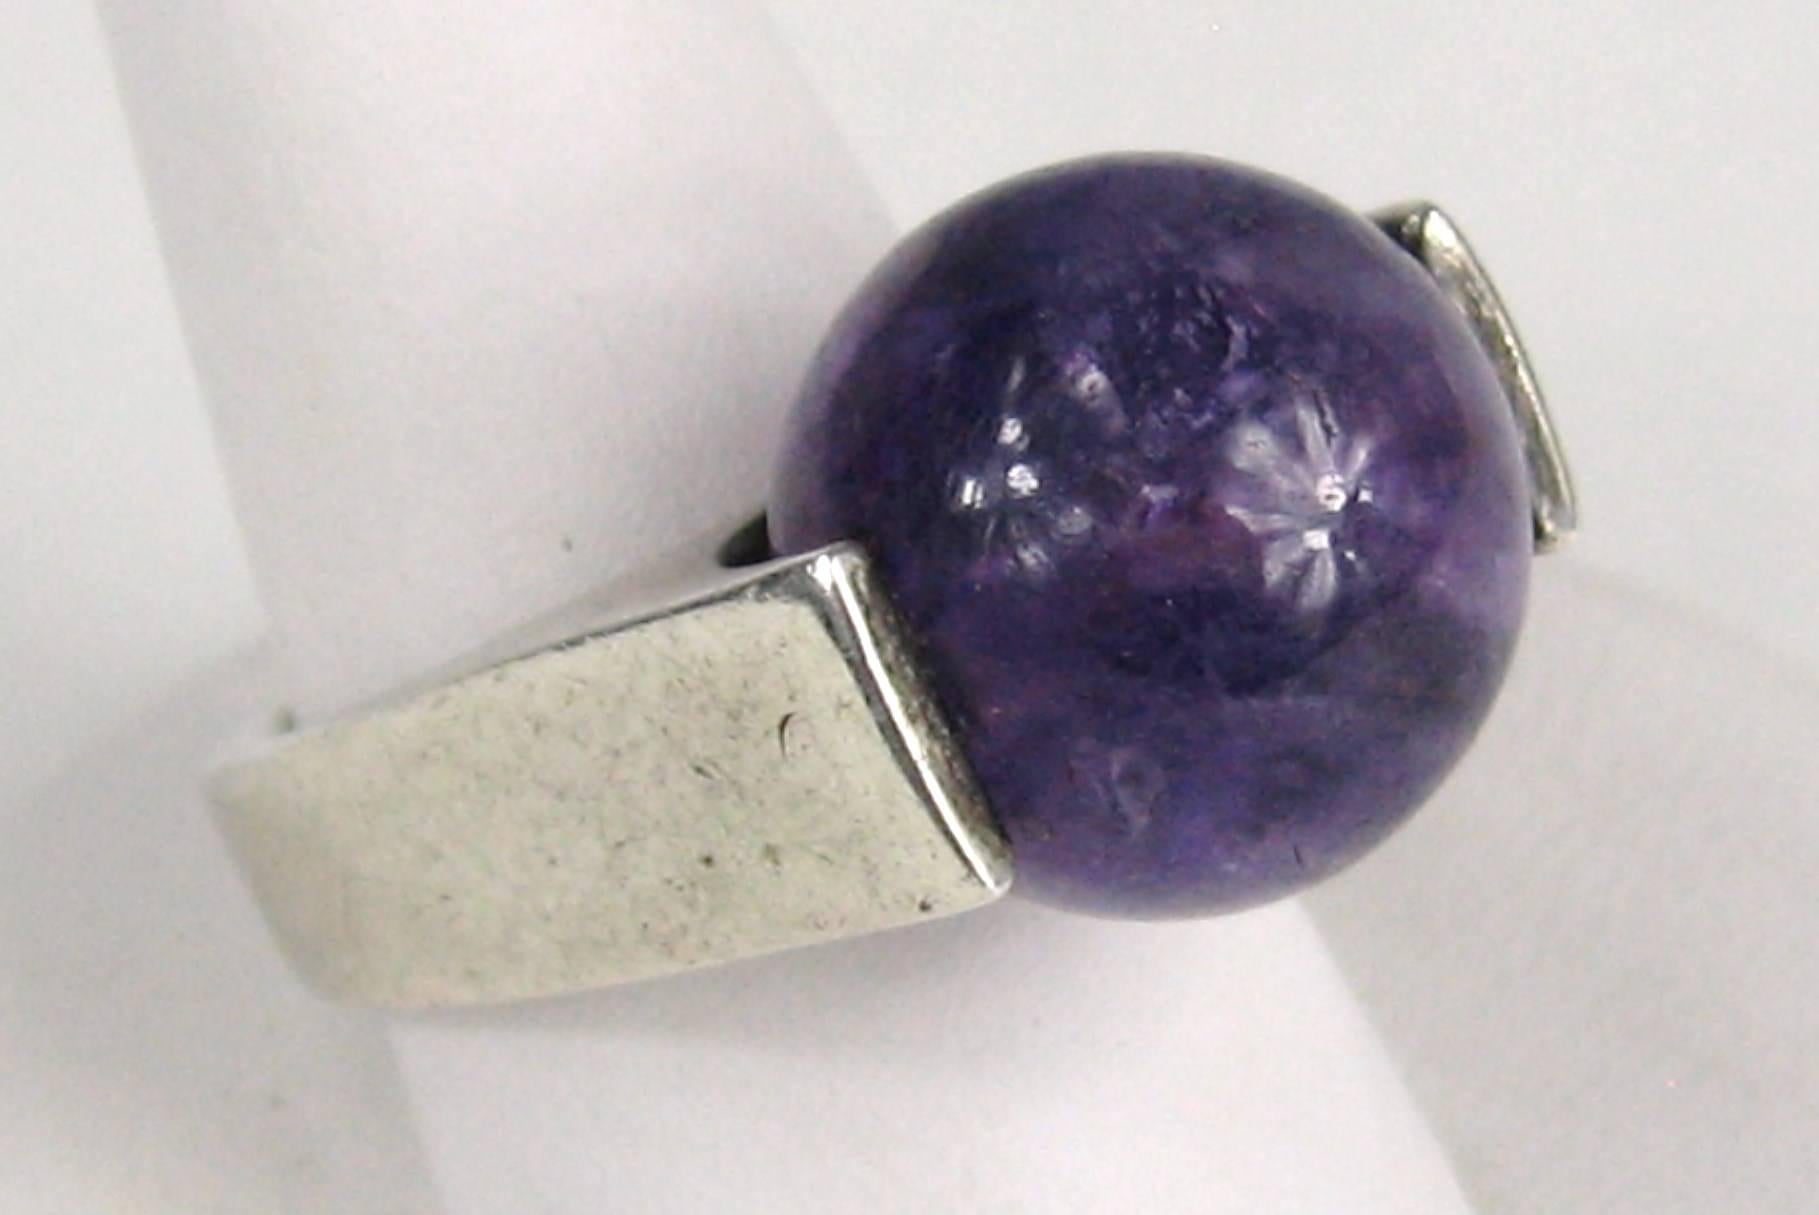 Huge round Amethyst stone sitting in a fairly heavy sterling setting. Clean lines, very Modernist. This is a very cool ring. Size is 6 and can be sized by a  jeweler. Patina as found, unless you request a cleaning. This is out of a massive